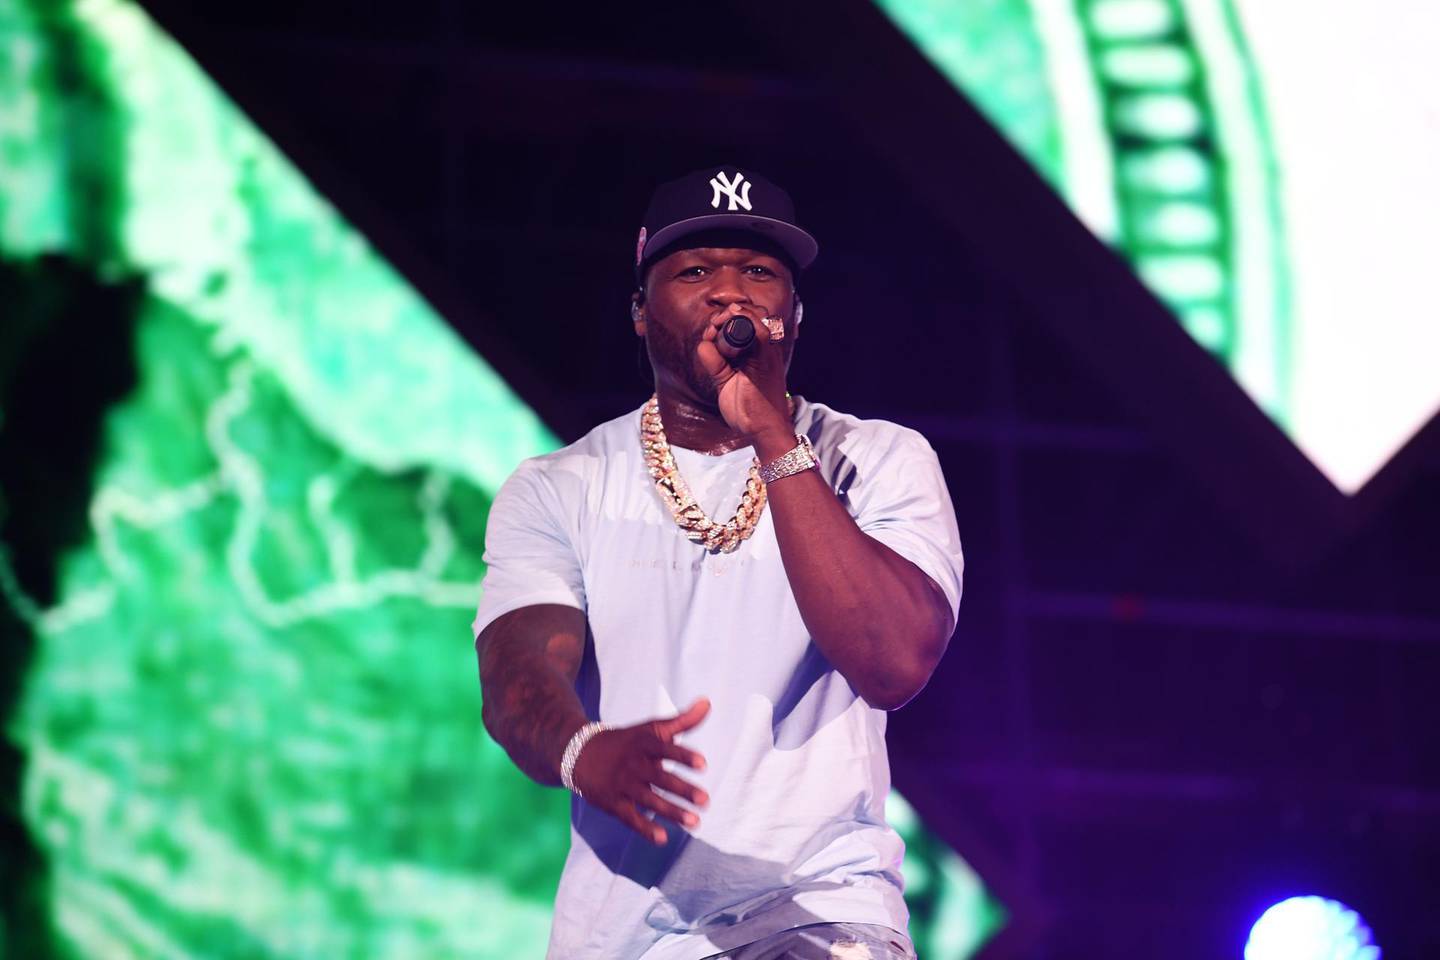 US rapper 50 Cent performs on stage during the Jeddah World music Festival on July 18, 2019, at the King Abdullah Sports City in the coastal city of Jeddah. US Pop icon Janet Jackson and US rapper 50 Cent are among musicians set to perform in Saudi Arabia, organisers said, after US rapper Nicki Minaj pulled out in a show of support for women's rights. / AFP / AMER HILABI
